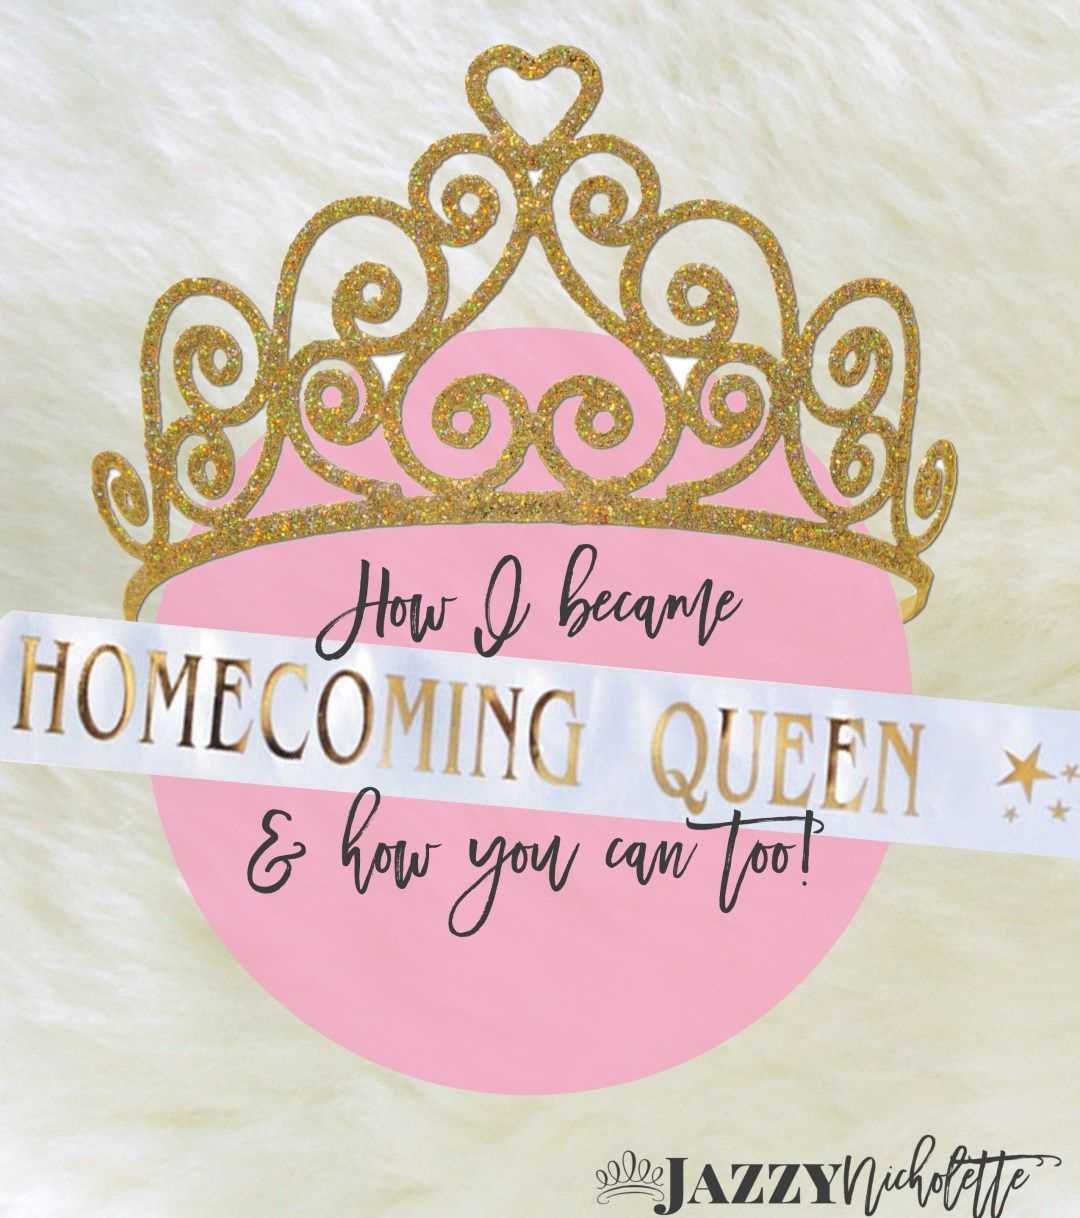 10 Nice Campaign Ideas For Homecoming Queen high school homecoming queen campaign ideas prom high school 1 2024